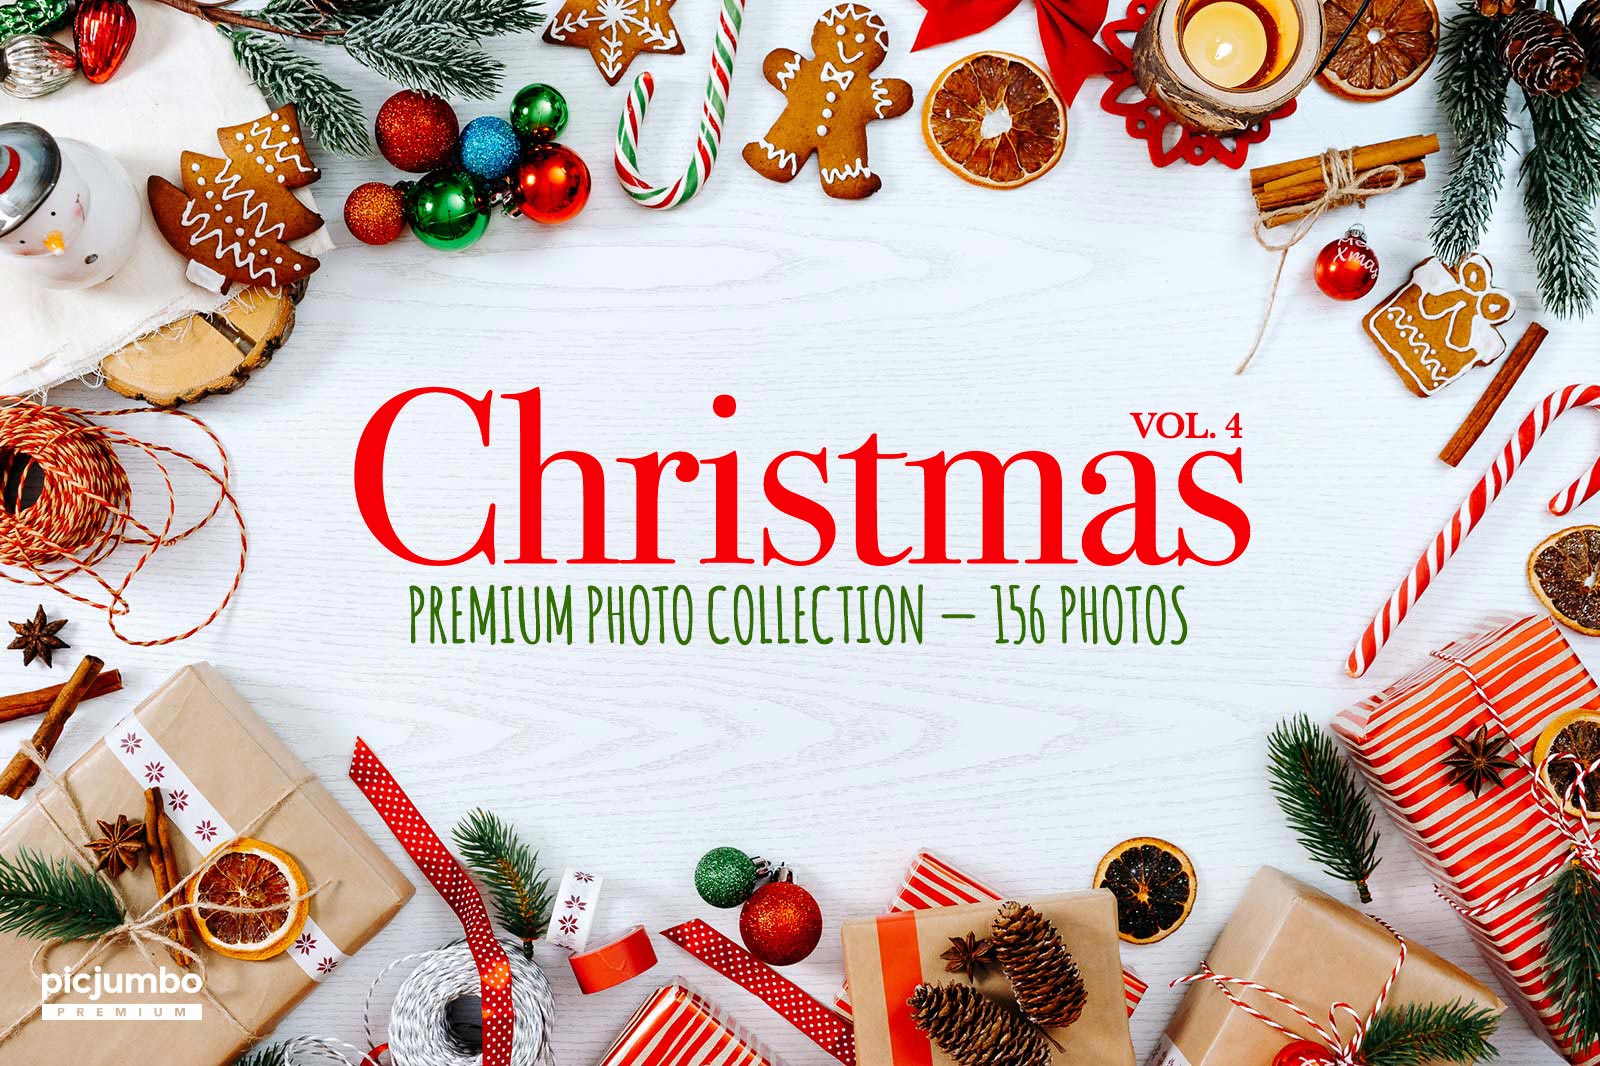 Download hi-res stock photos from our Christmas Photos Vol. 4 PREMIUM Collection!